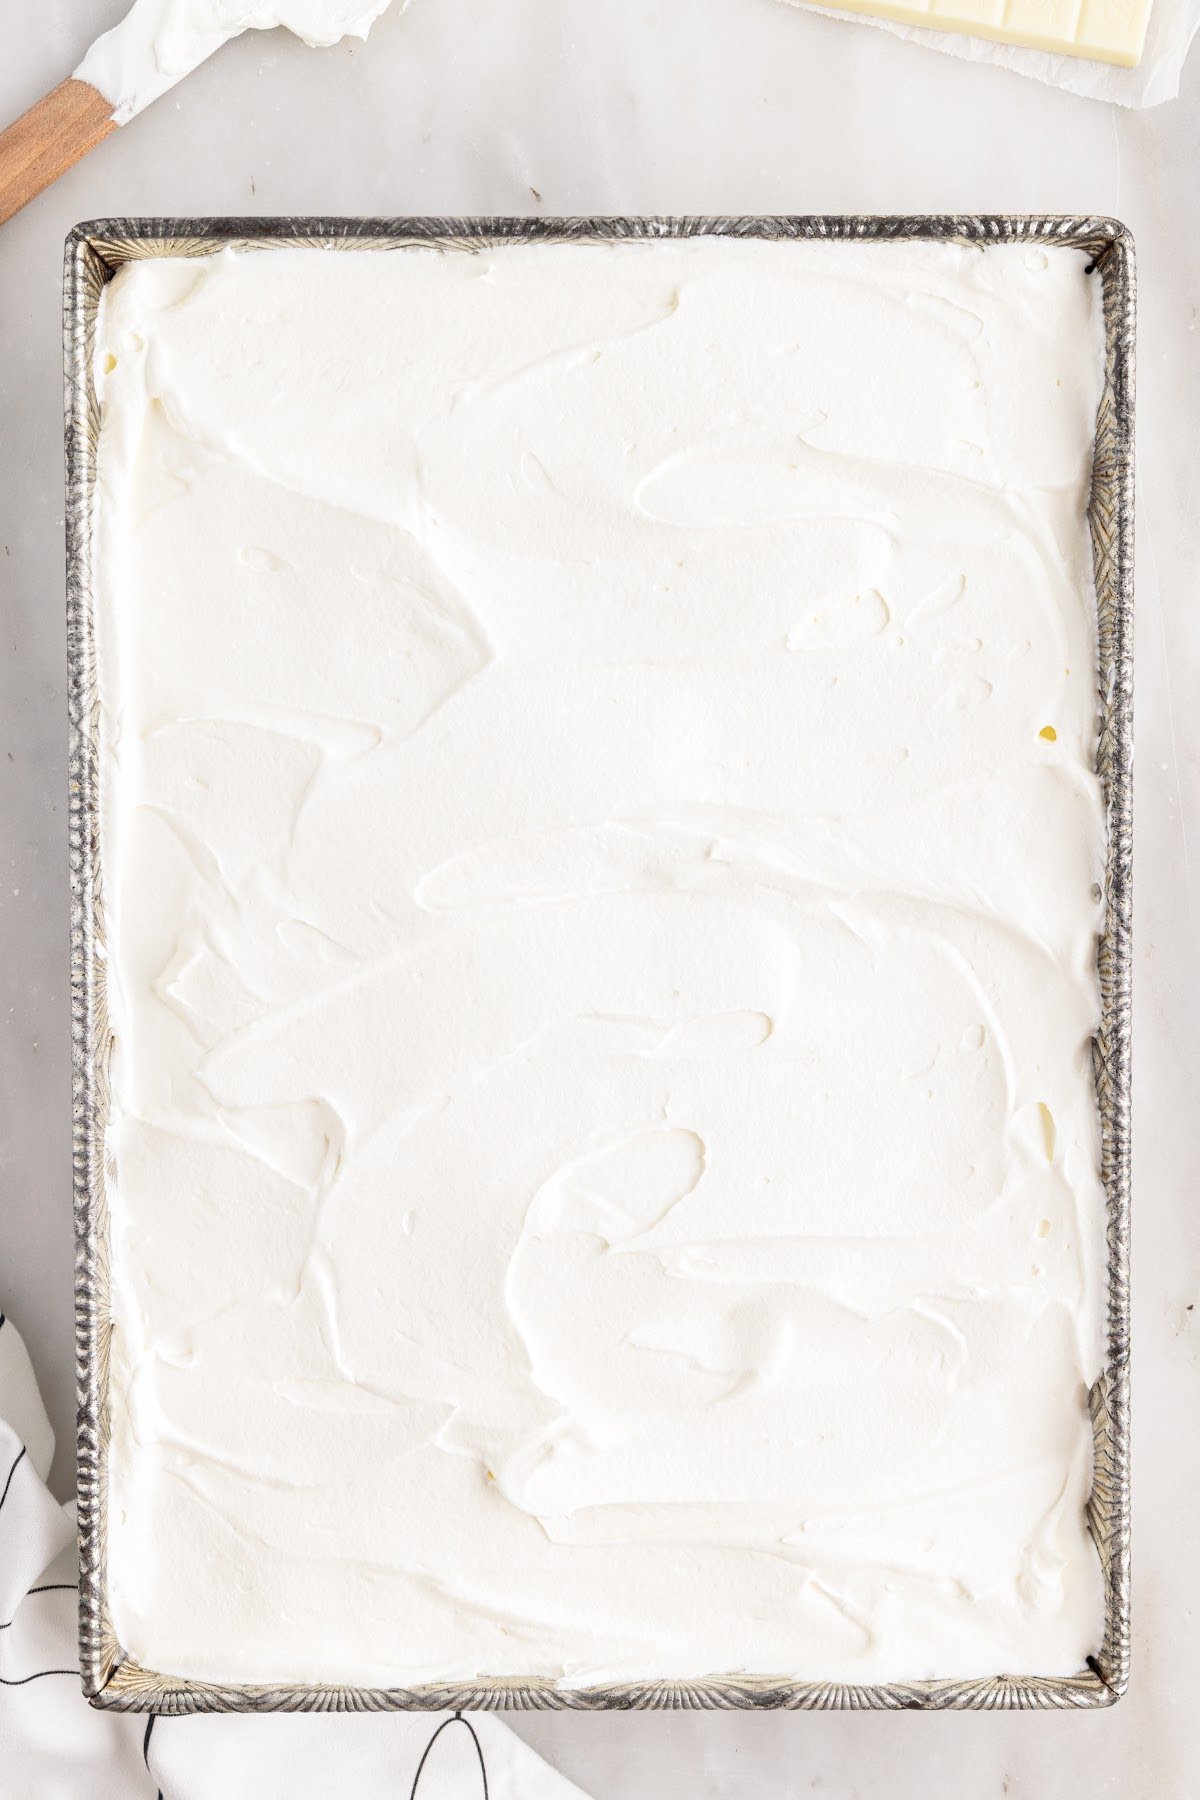 Lasagna topped with cool whip in the baking dish.